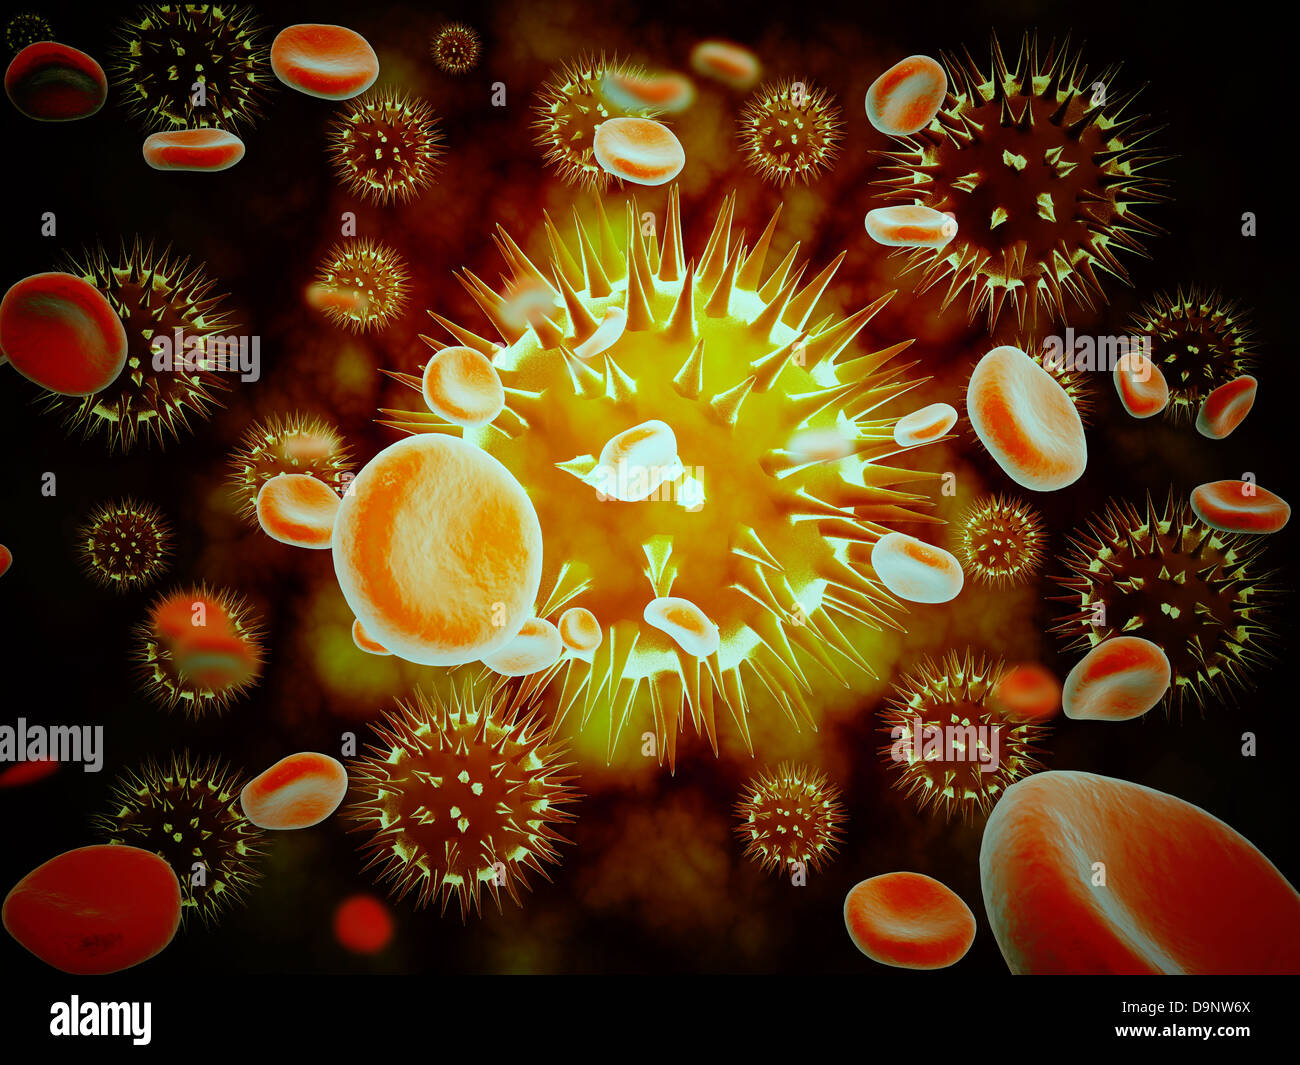 Cancer cell with red blood cell flow. Stock Photo